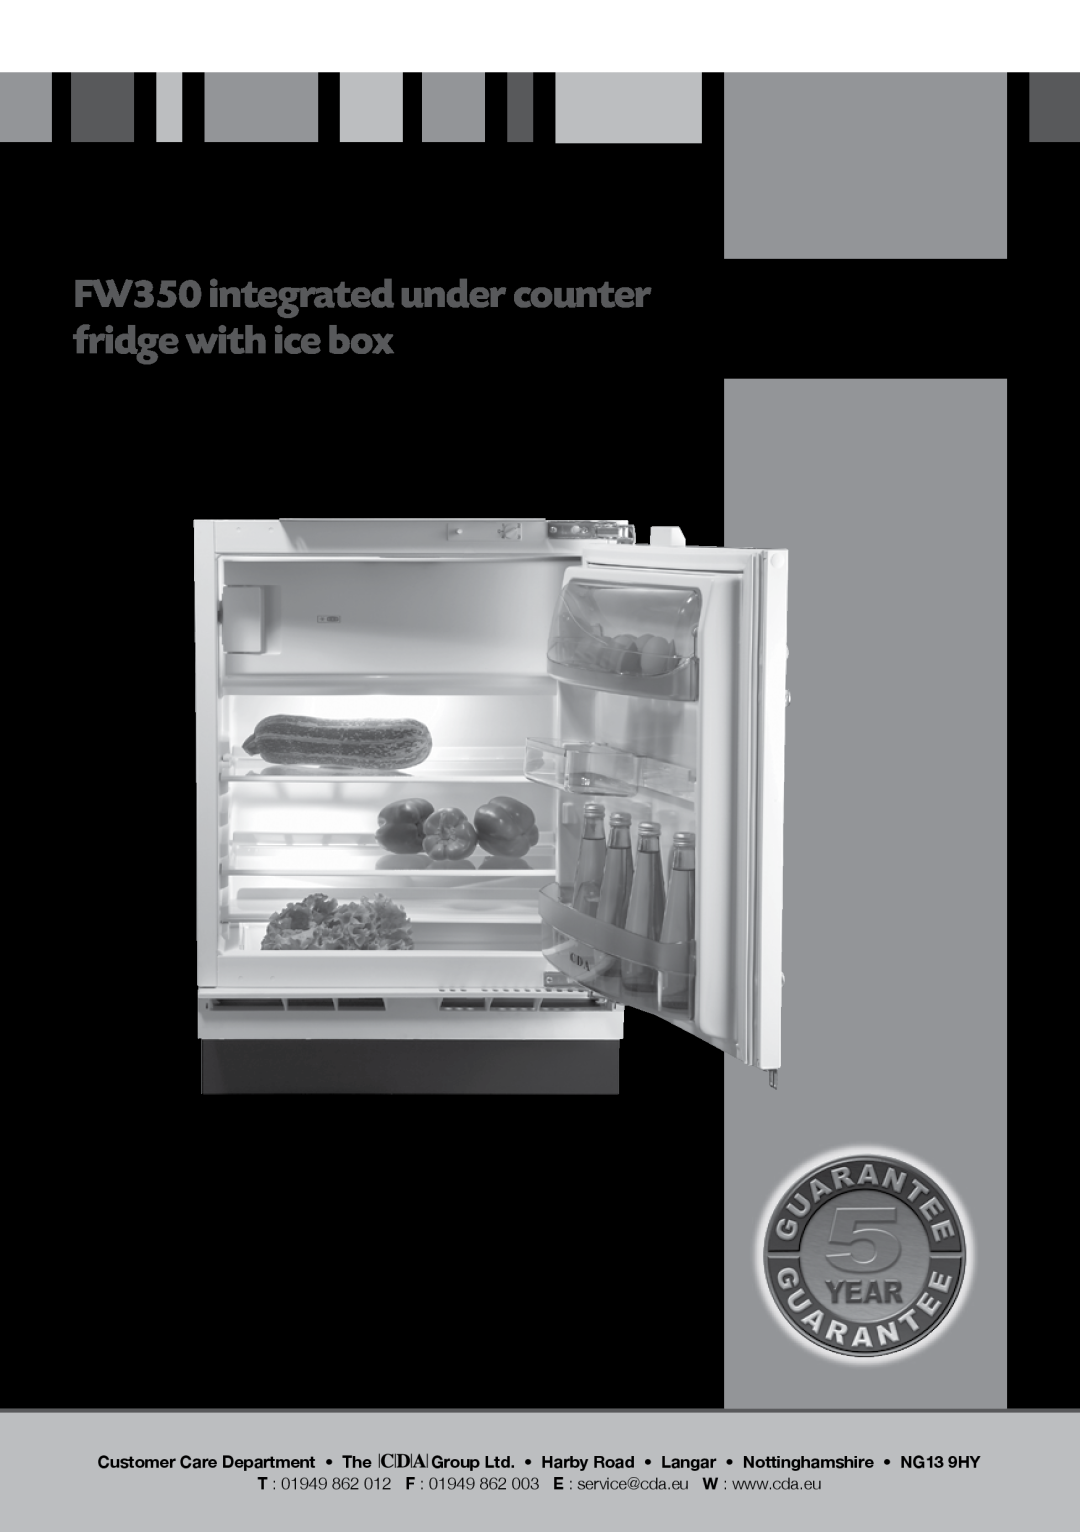 CDA manual FW350 integrated under counter fridge with ice box, Manual for Installation, Use and Maintenance, T 